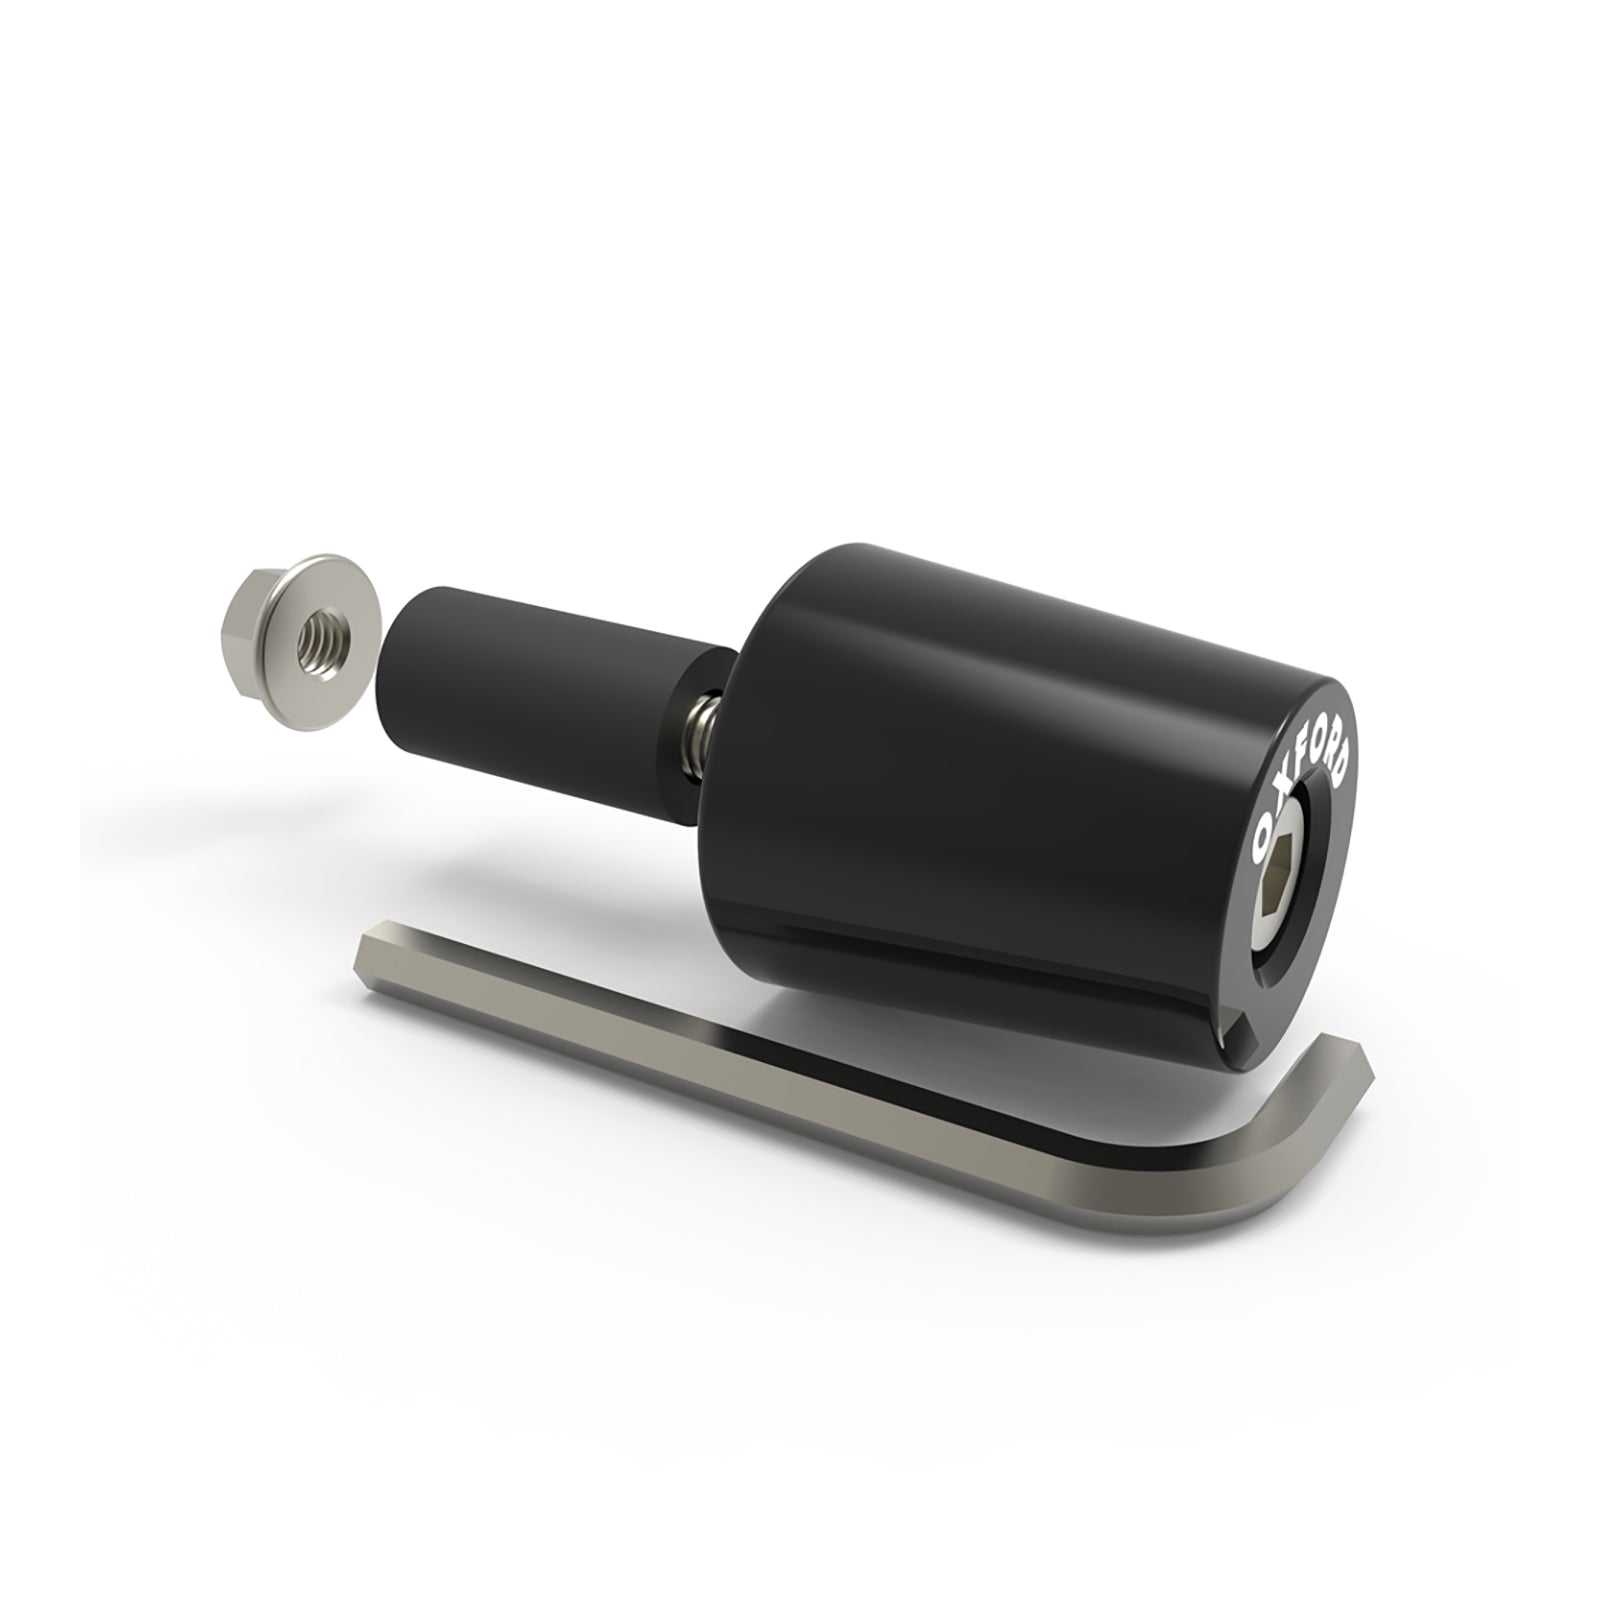 Oxford, Oxford Handlebar End Weights - Black Anodised 67g (Pair)